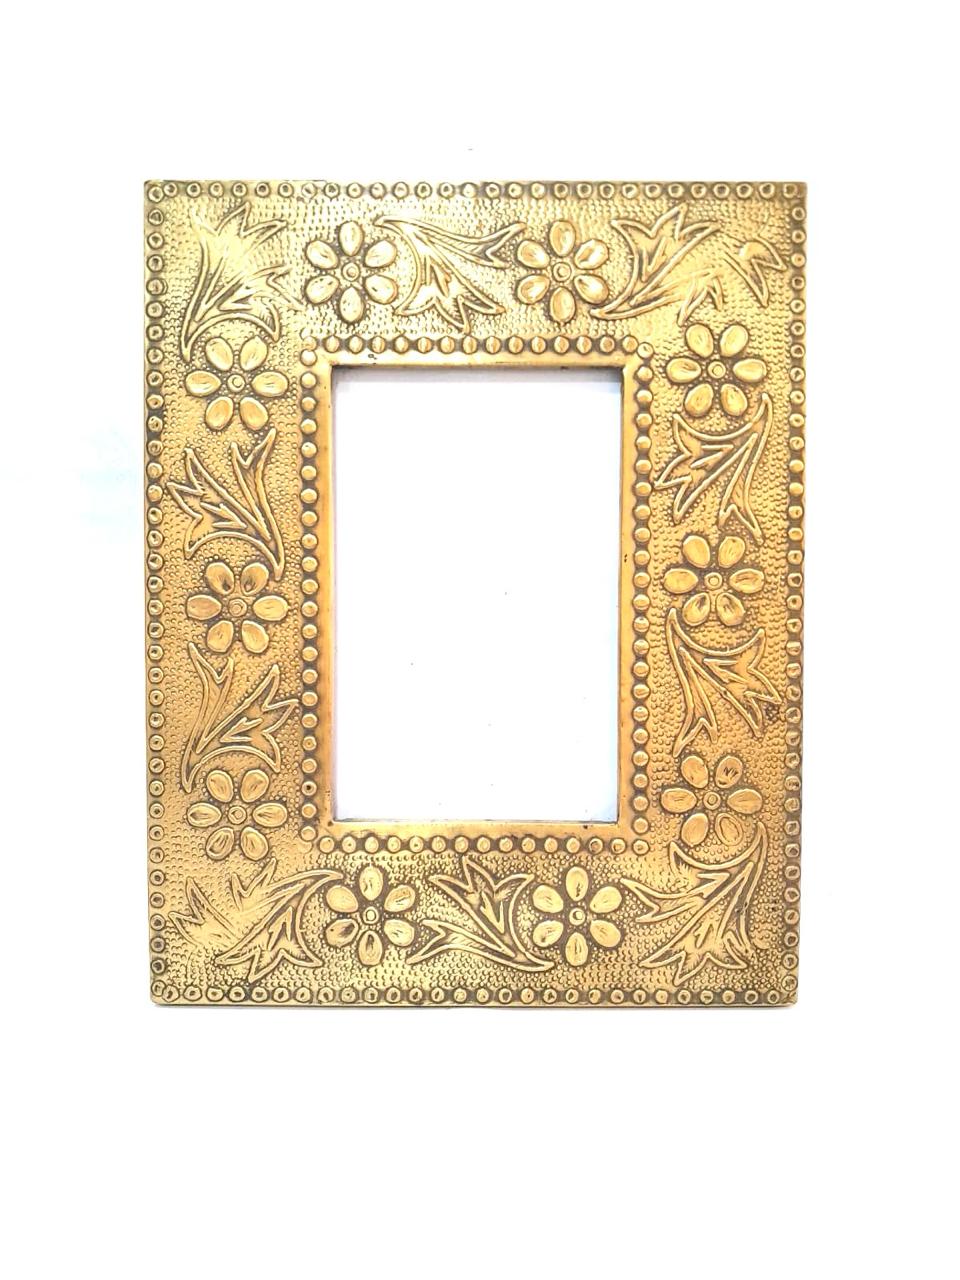 Brass Designed Photo Frames Antique Collection To Store Memories By Tamrapatra